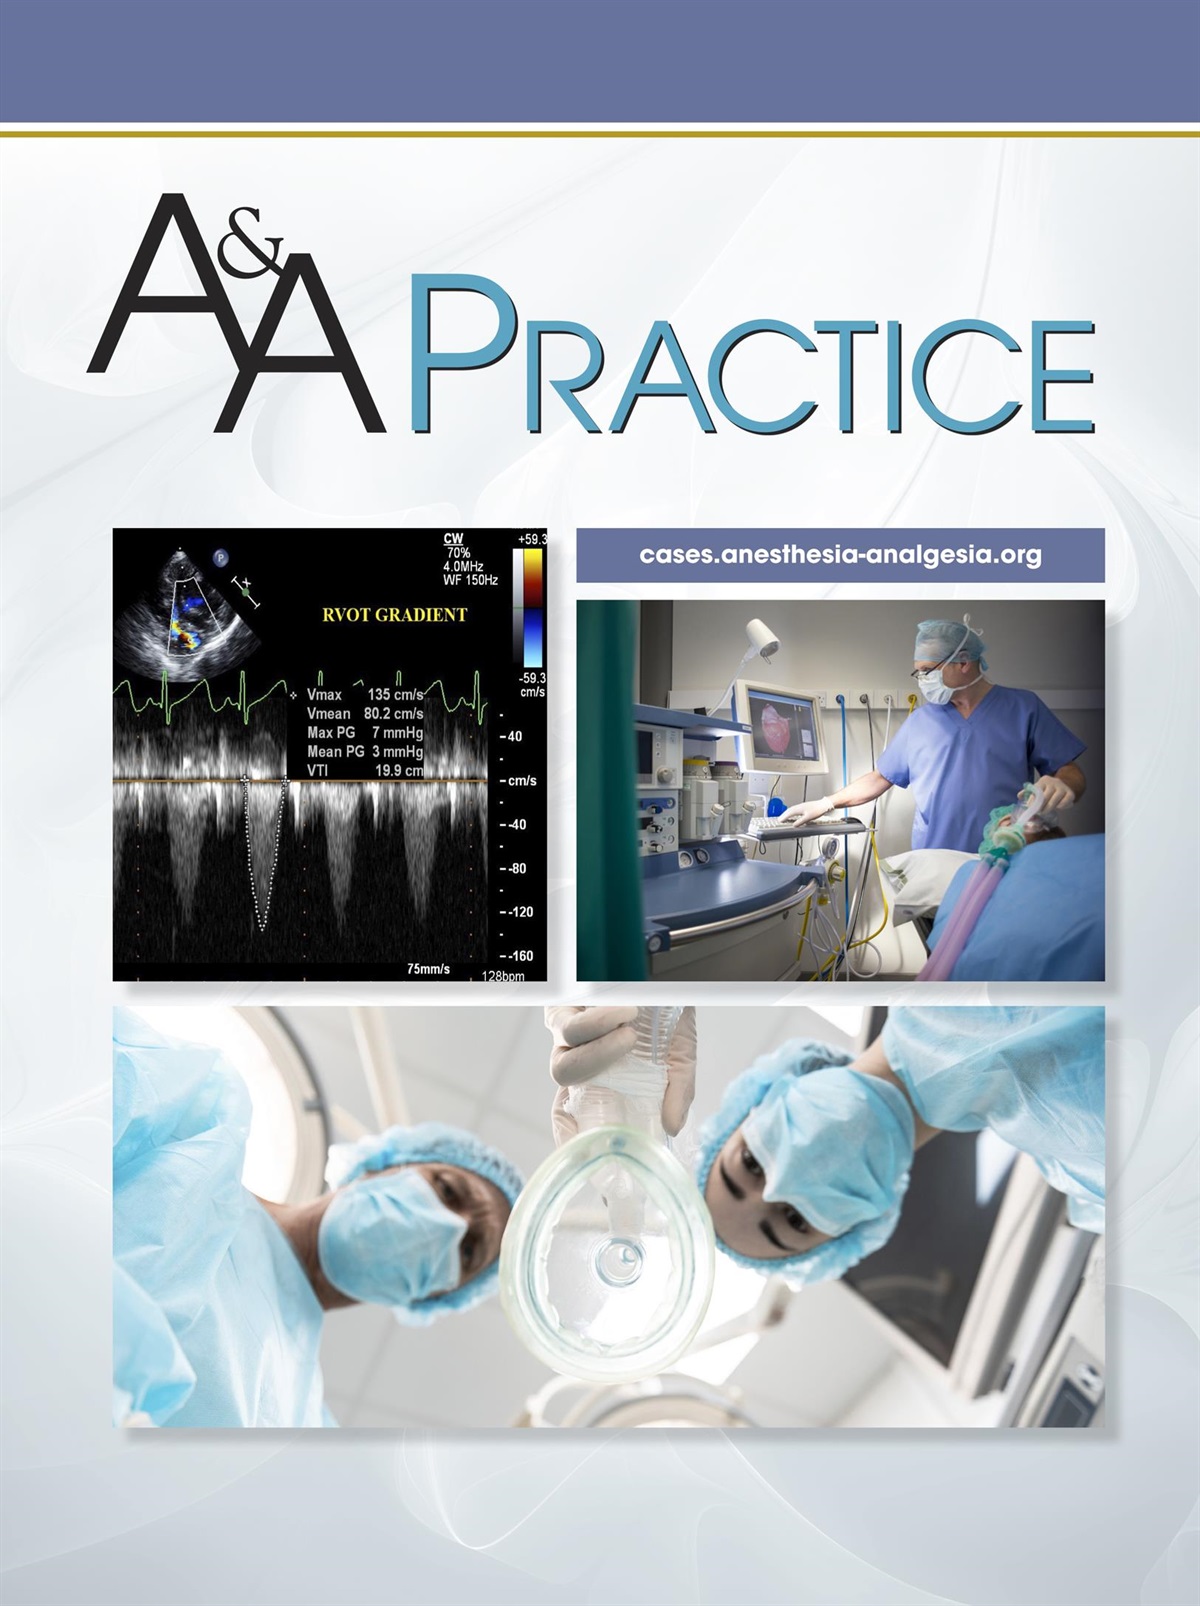 Utilization of a Supraglottic Airway Device for Airway Rescue and Tamponade of an Oropharyngeal Hemorrhage After Systemic Thrombolysis for an Acute Ischemic Stroke: A Case Report